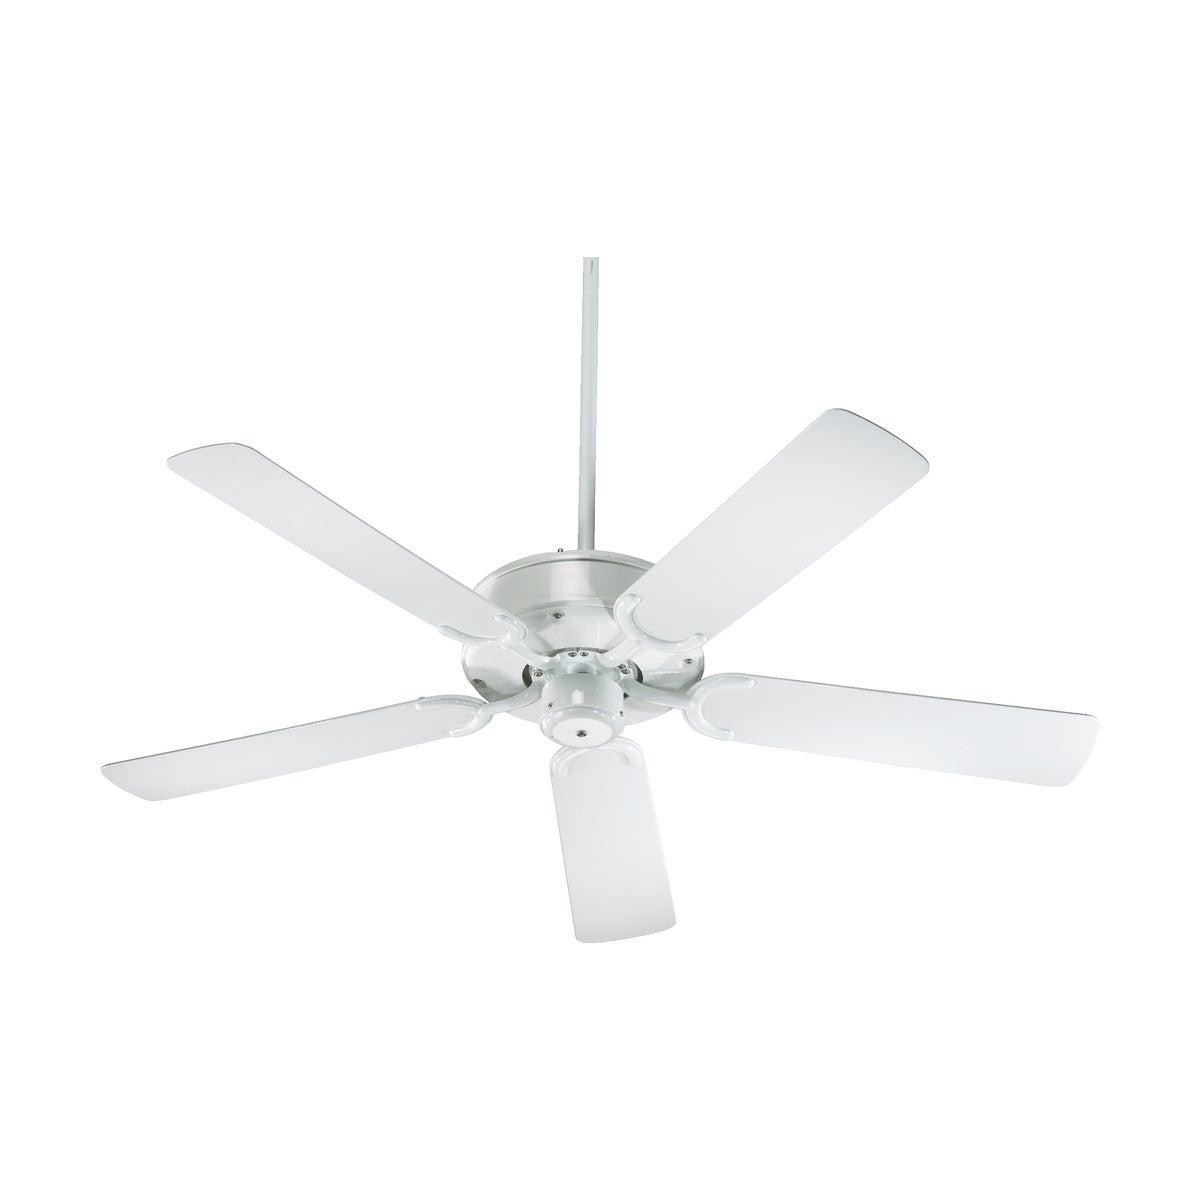 All-Weather Allure 52-in White Indoor/Outdoor Ceiling Fan (5-Blade)